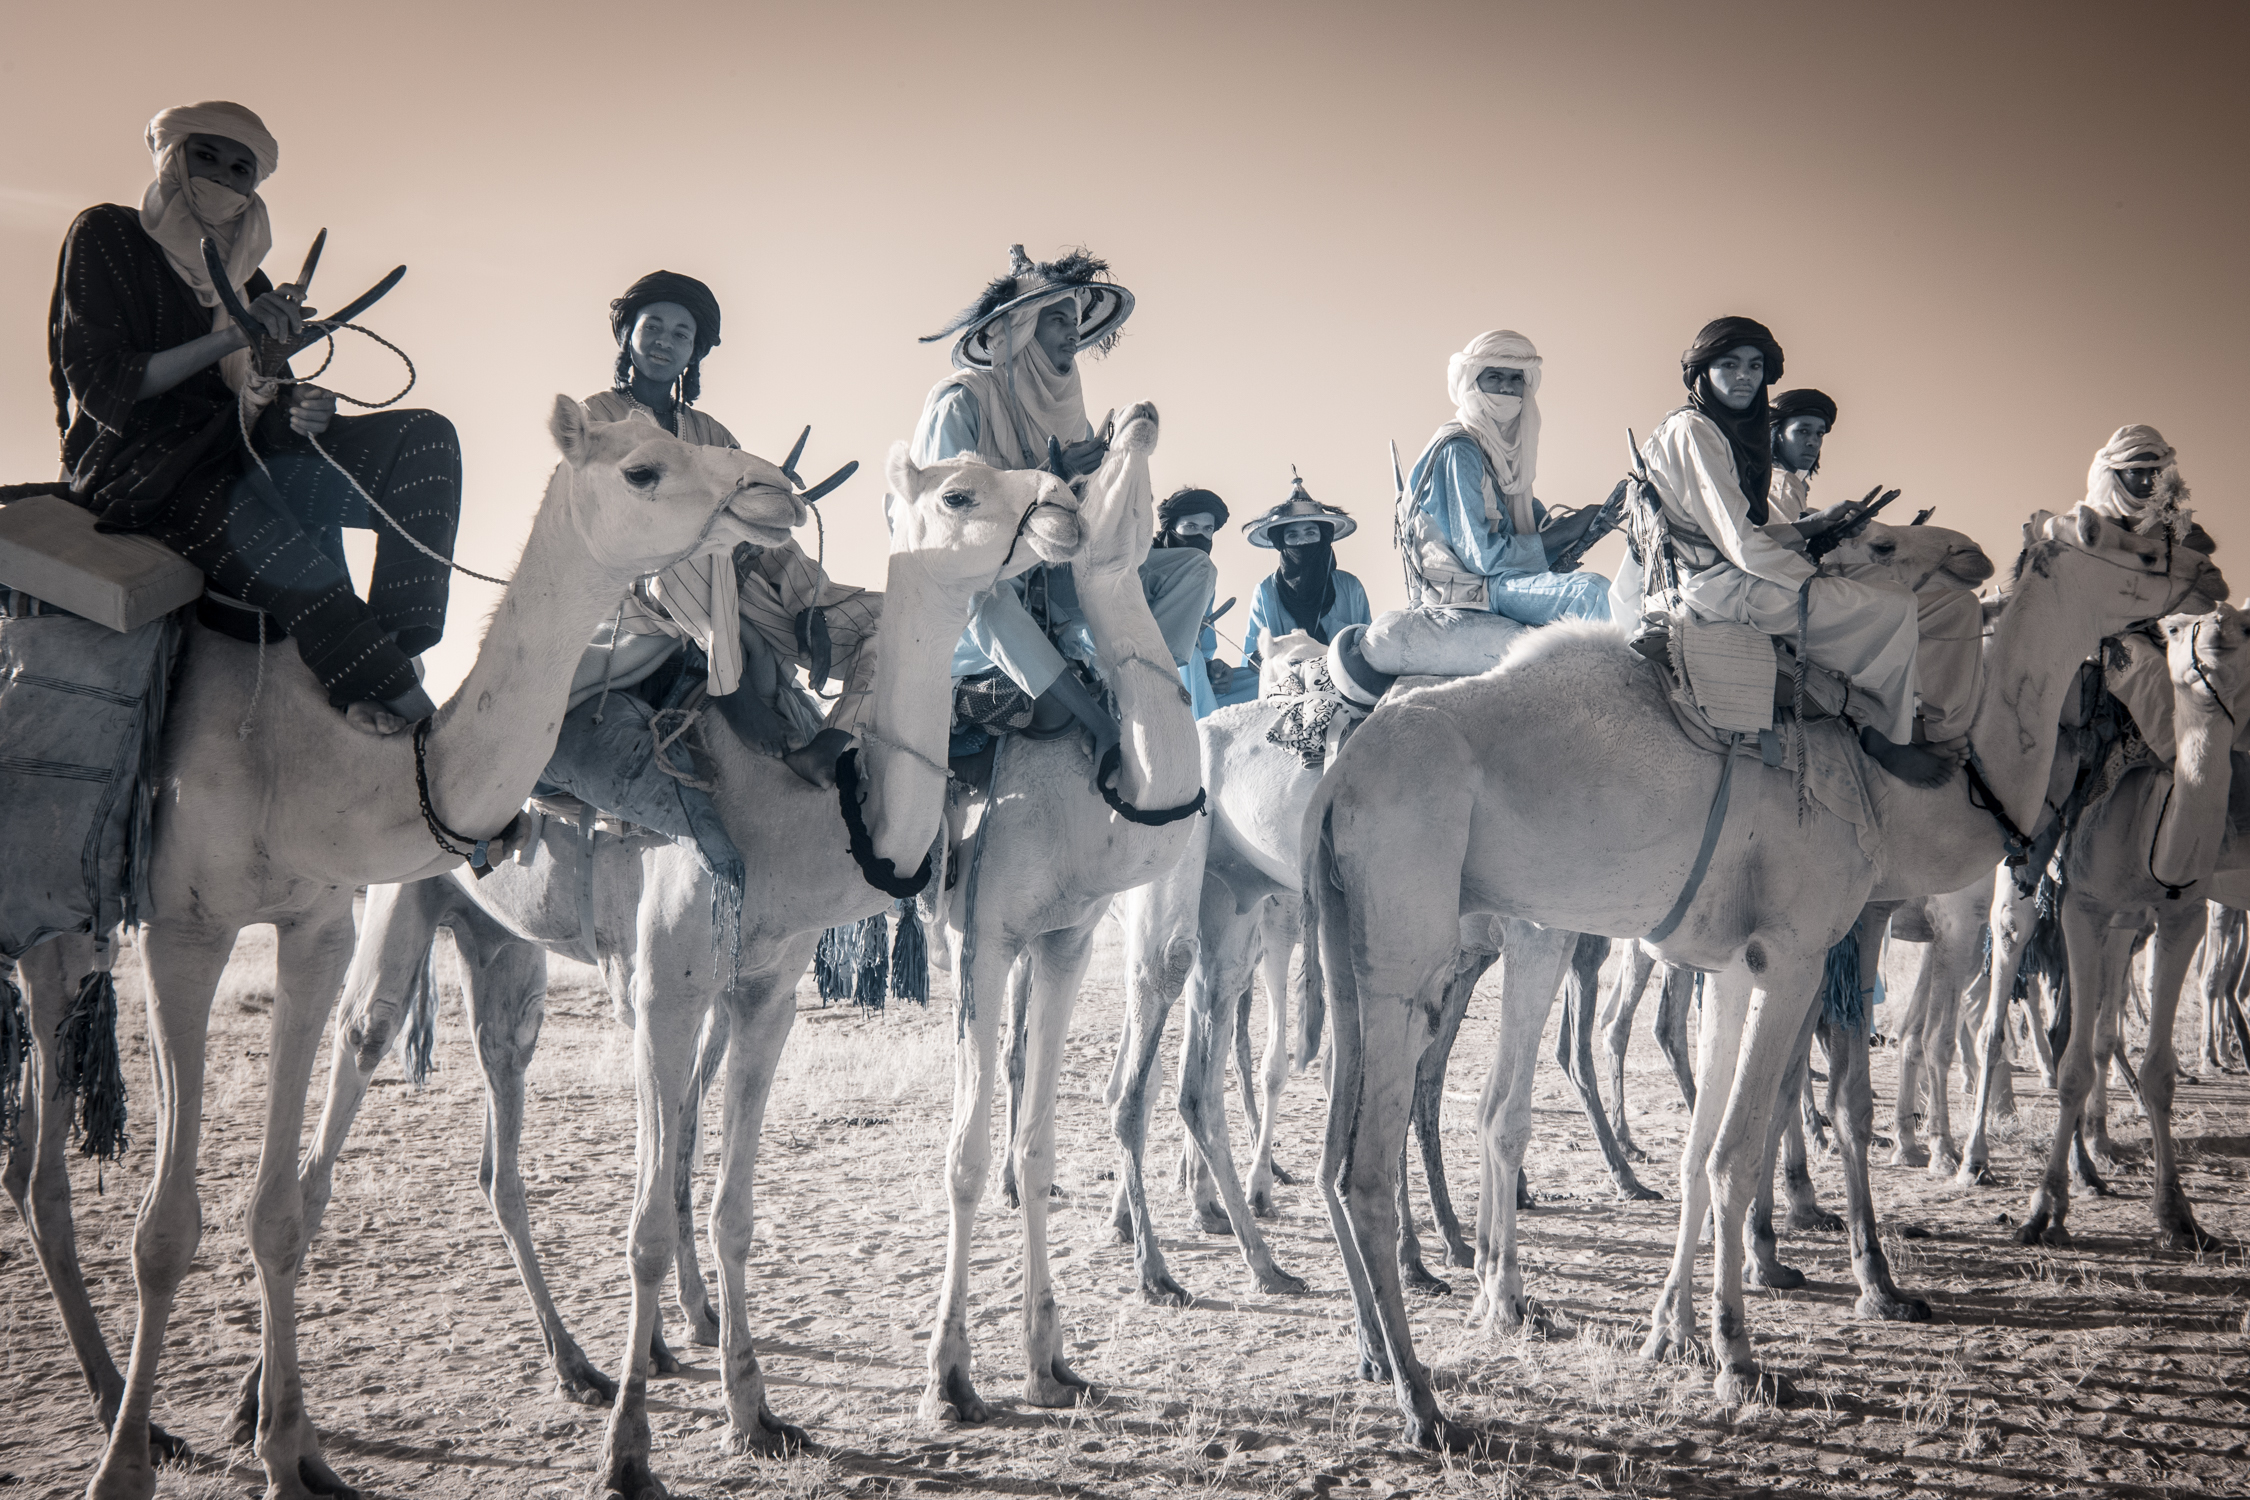  Legendary herders and caravaners of the Sahel desert, the Wodaabe are among the last nomads on earth. 